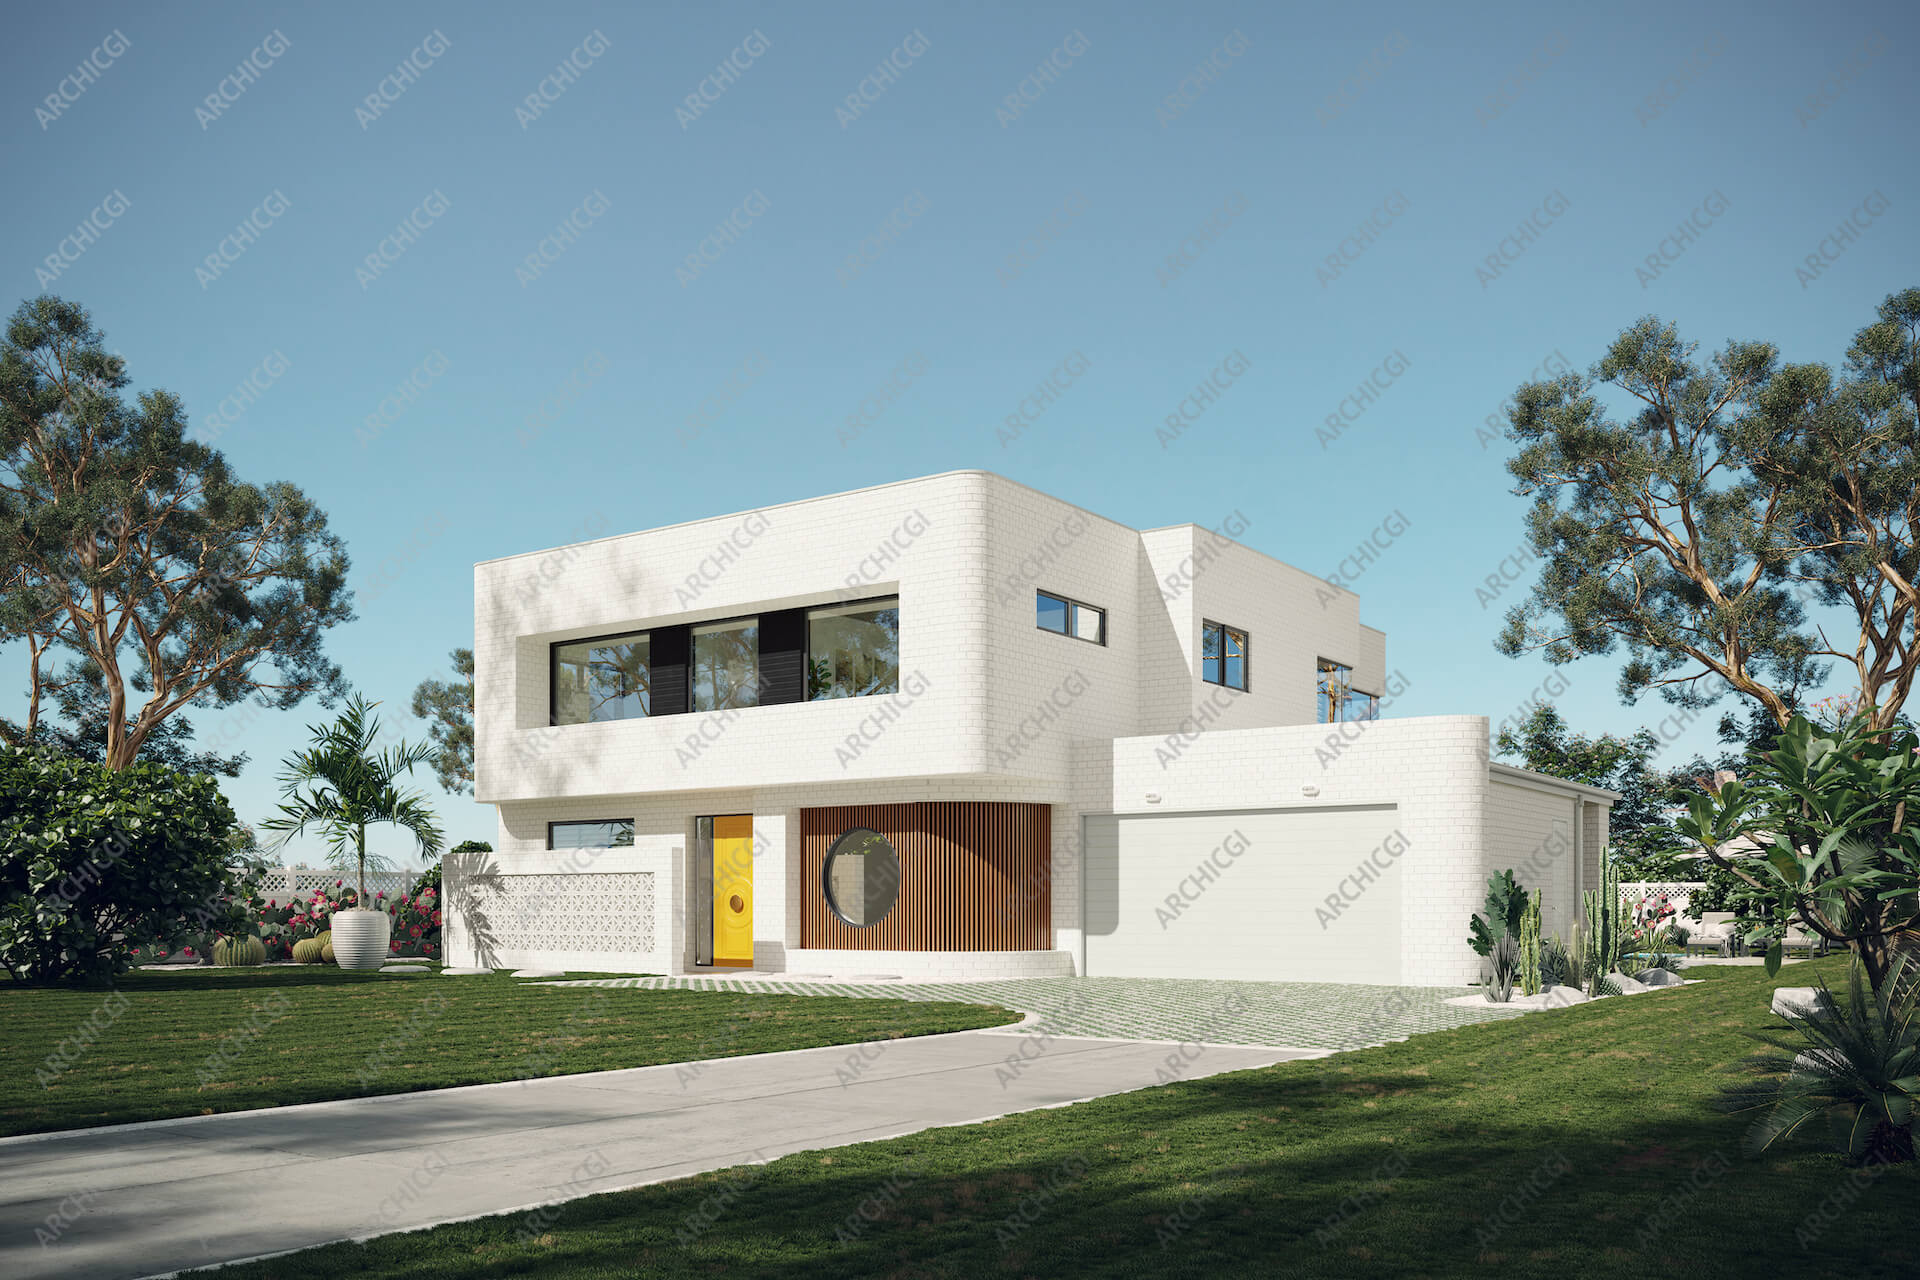 High-Quality 3D House Exterior Rendering with CGI Studio’s Watermark